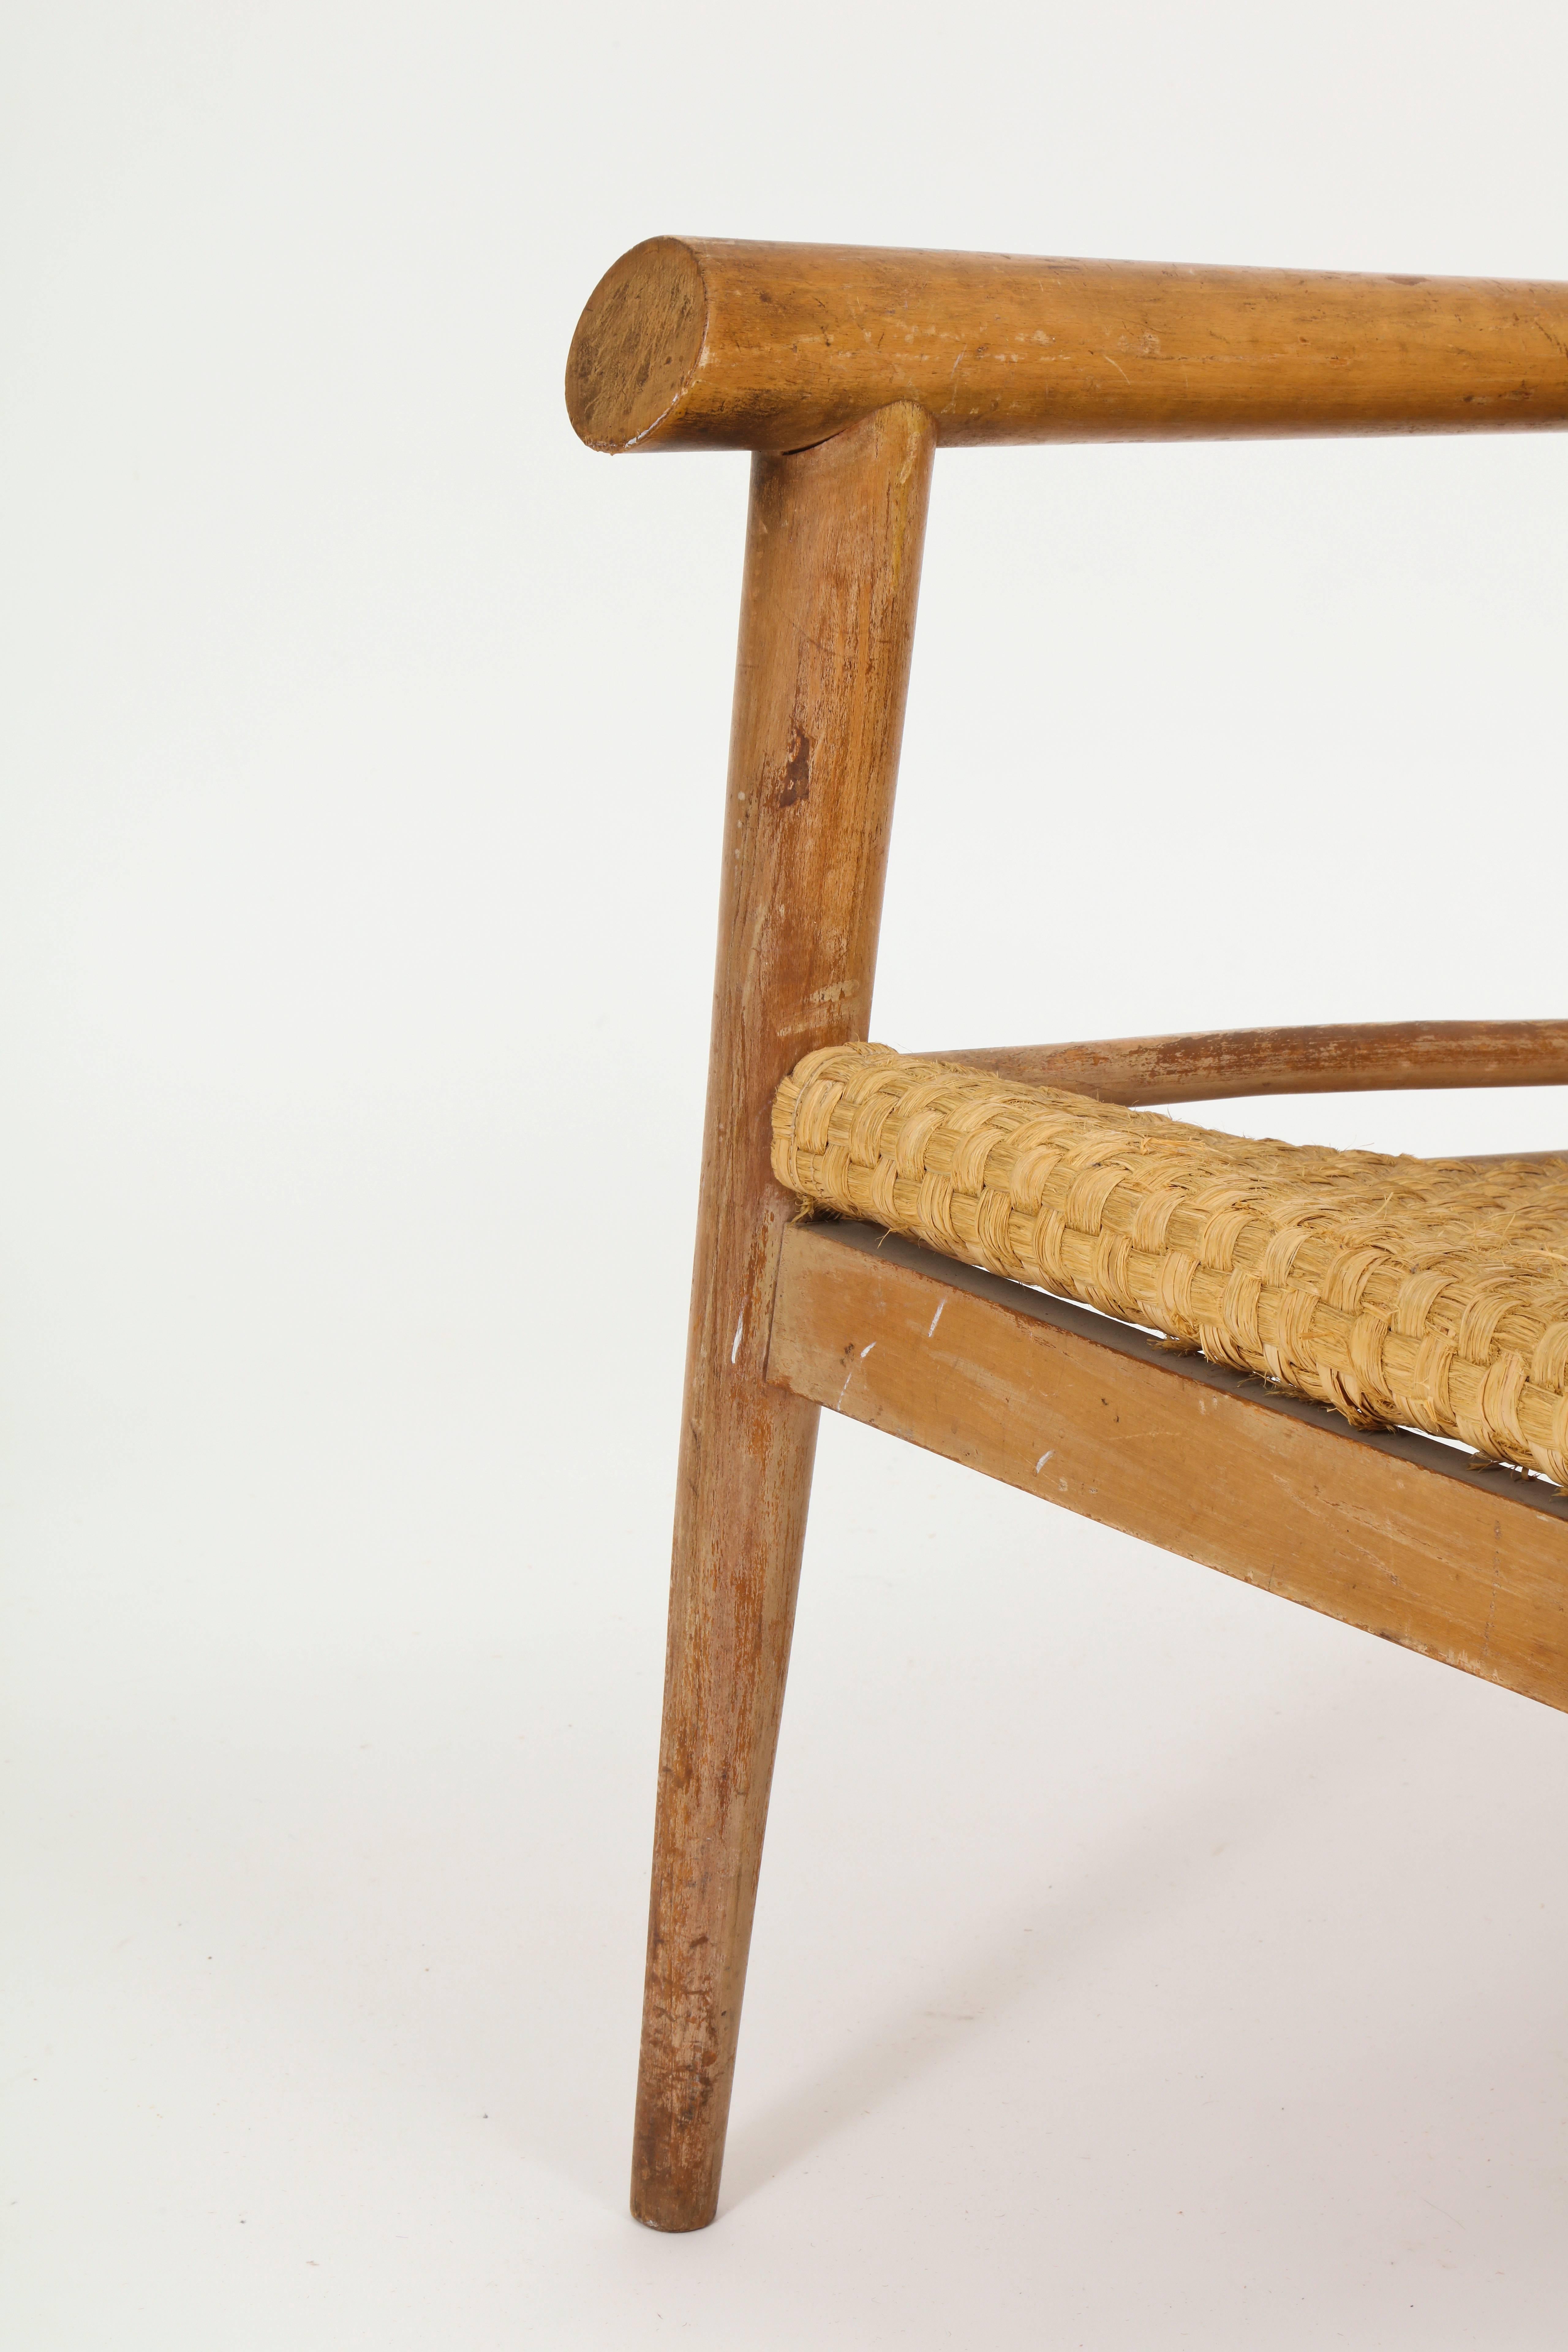 Straw Wicker Woven Rush Chair Midcentury Jean Michel Frank Style, 1930, France In Fair Condition For Sale In New York, NY